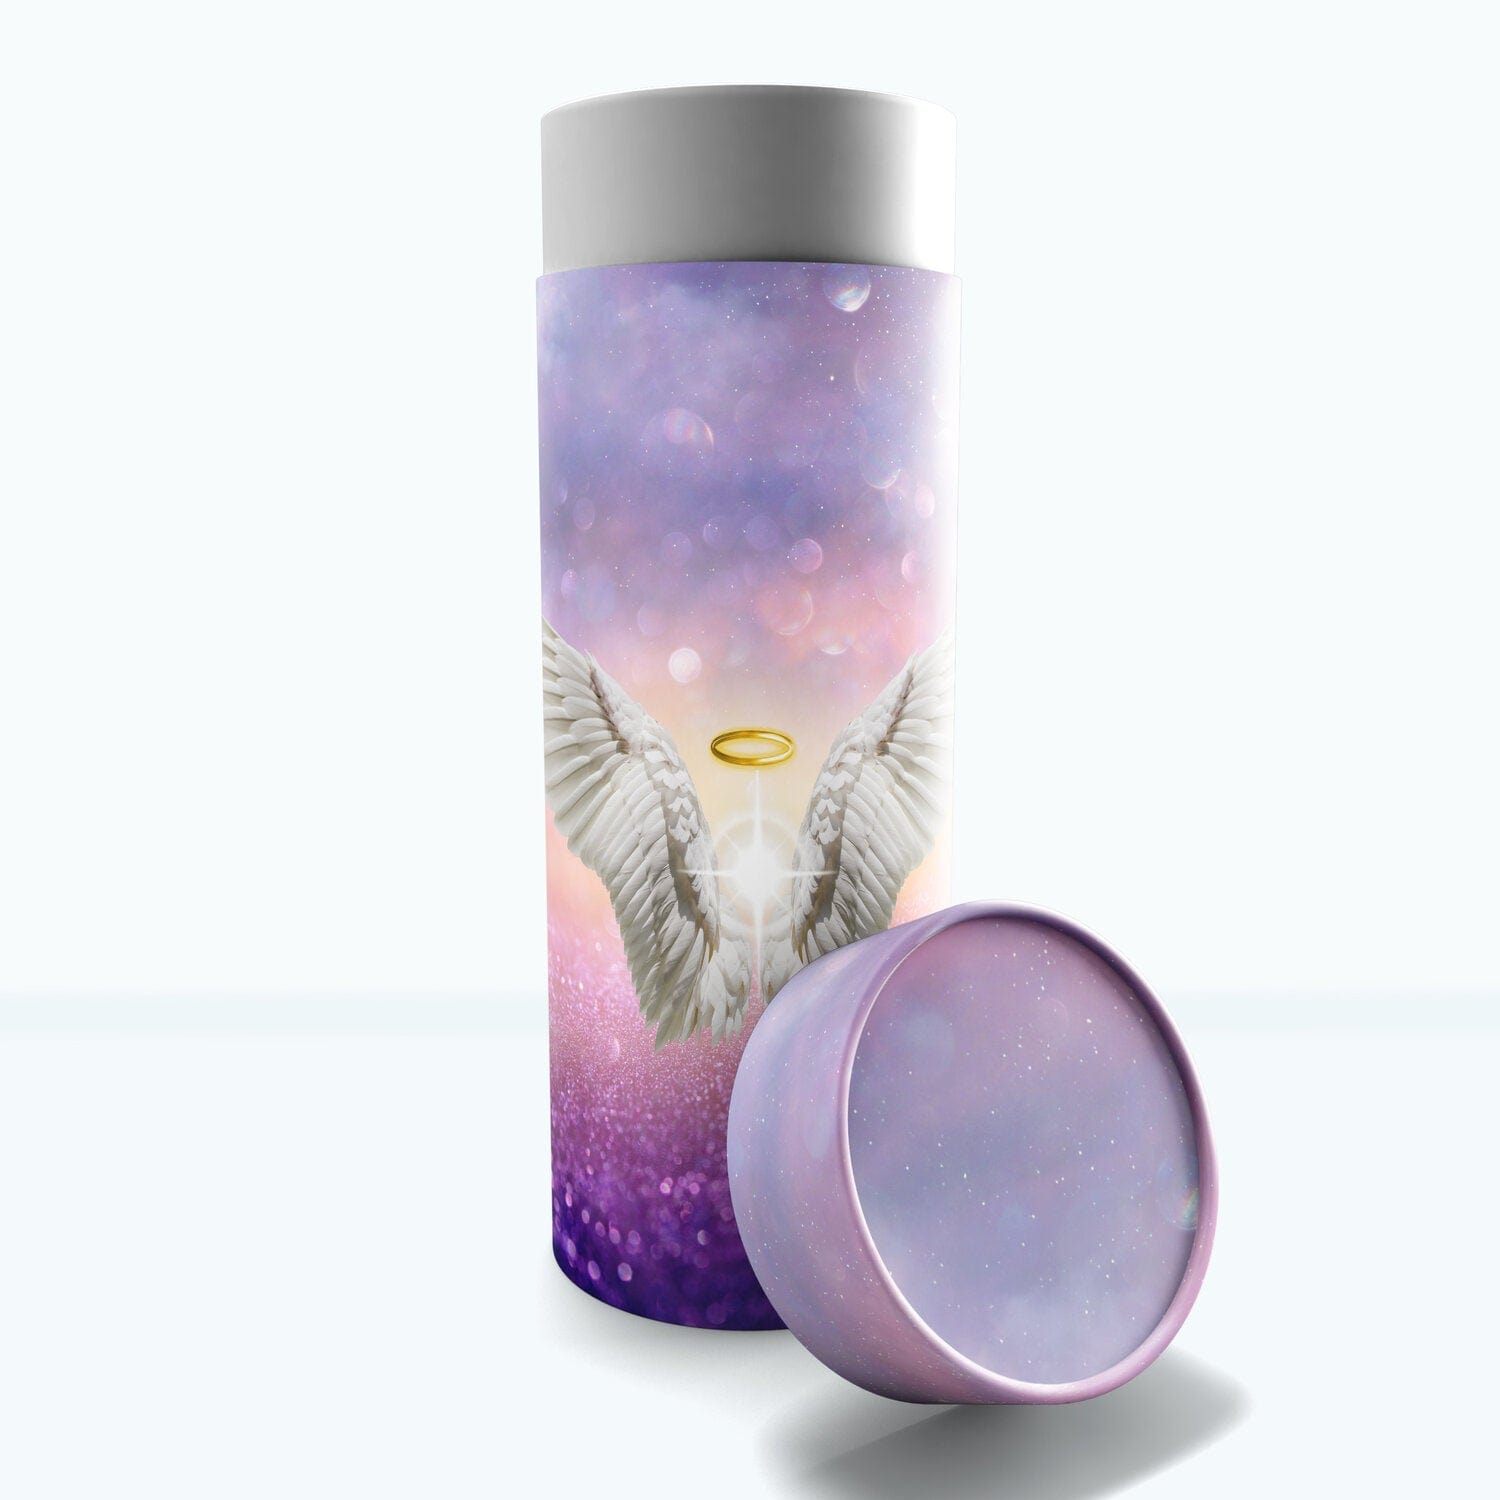 Commemorative Cremation Urns Small Guardian Angel (Purple) - Biodegradable & Eco Friendly Burial or Scattering Urn / Tube